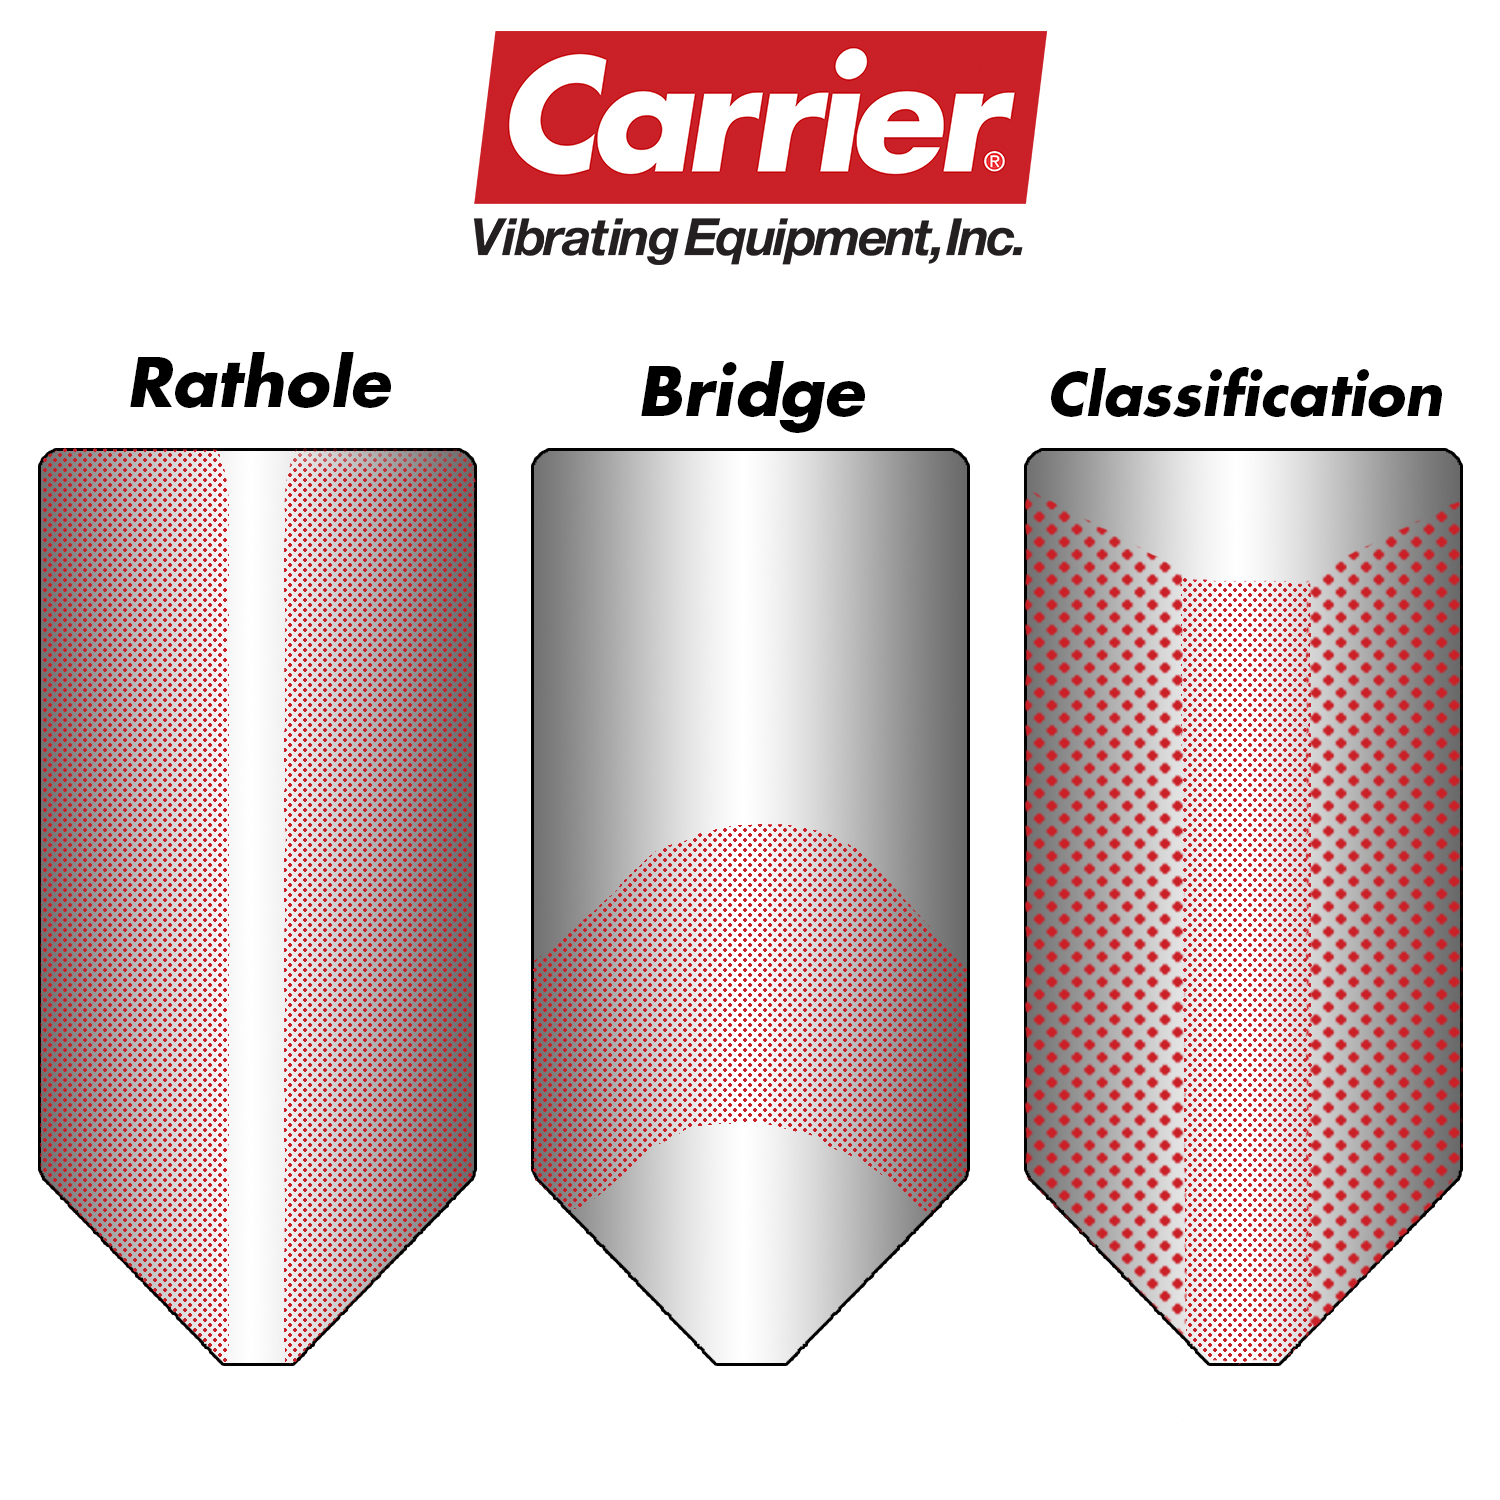 Carrier Vibrating Bin Dischargers to Prevent Storage Silo Flow Issues